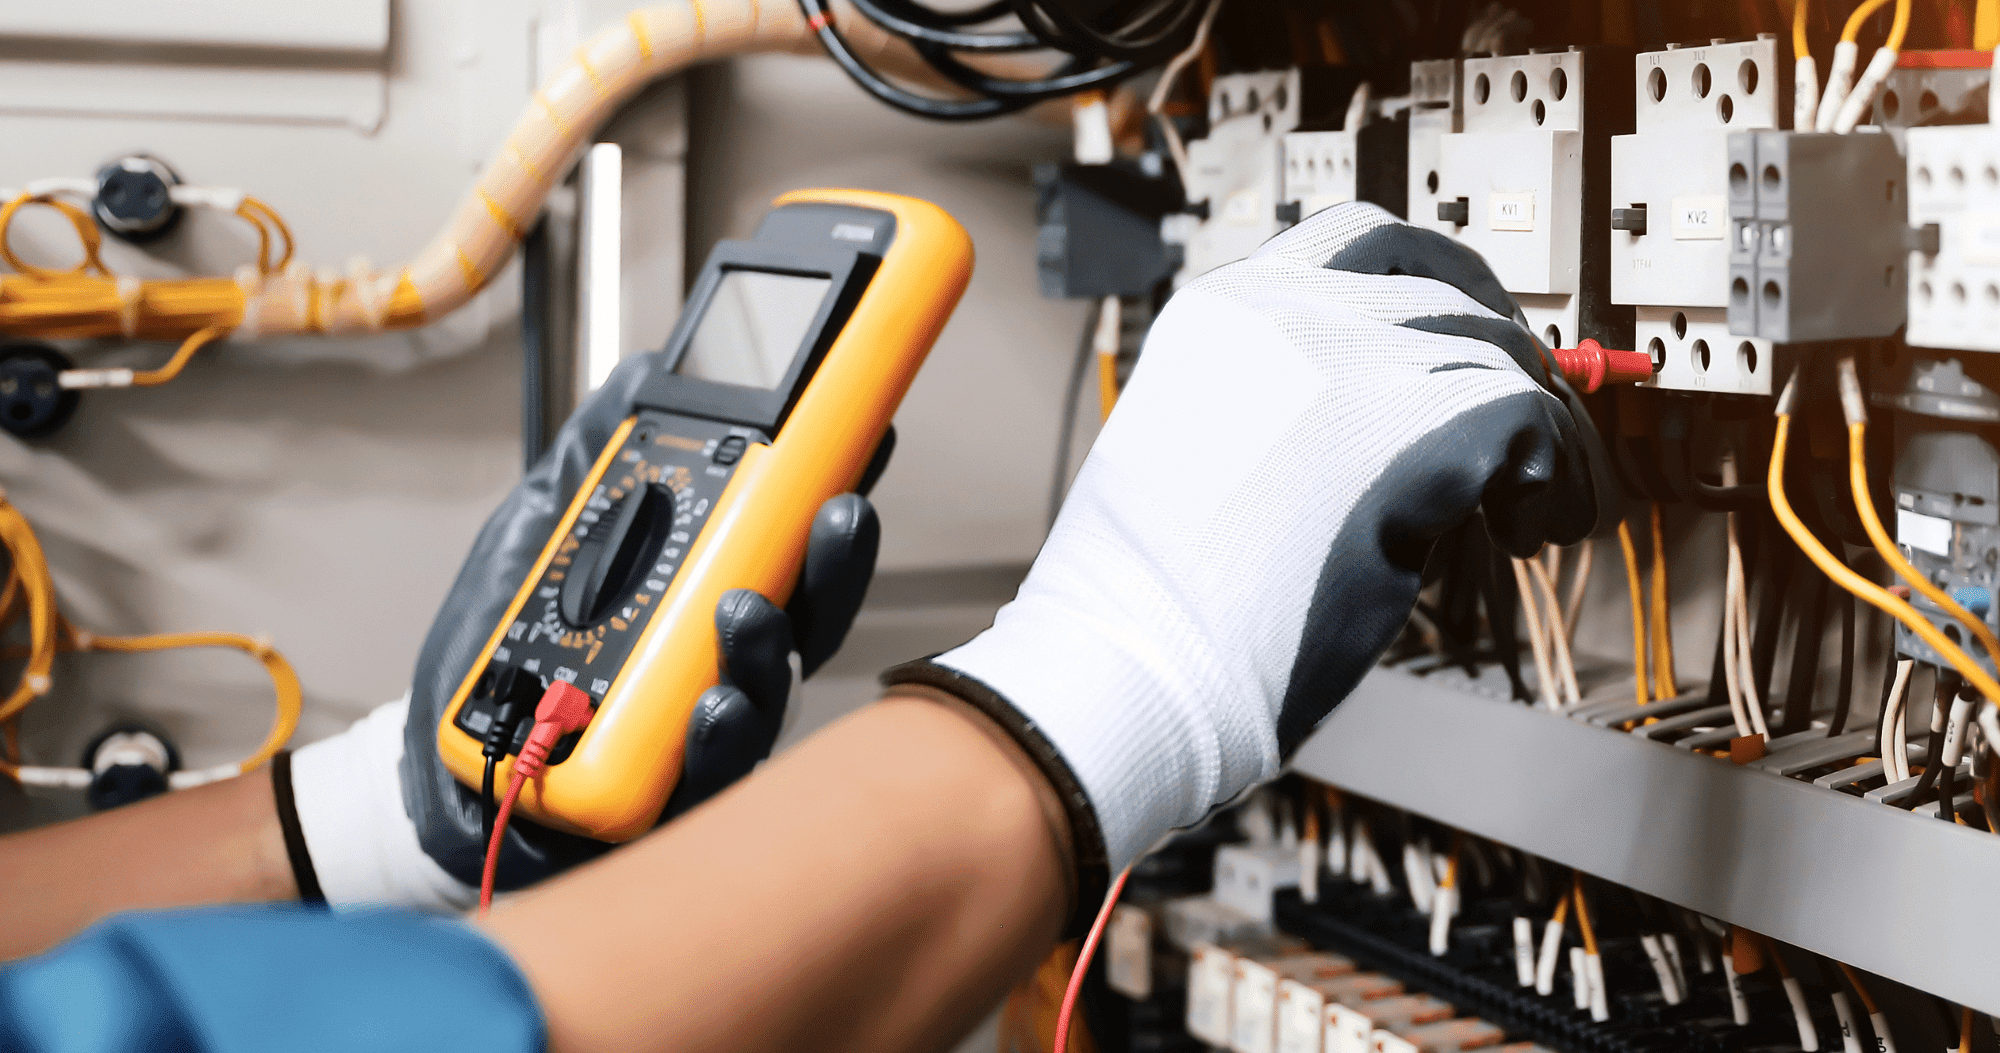 Electrical Person Wearing Safety Gloves Testing Wires Aspect Ratio 760 400